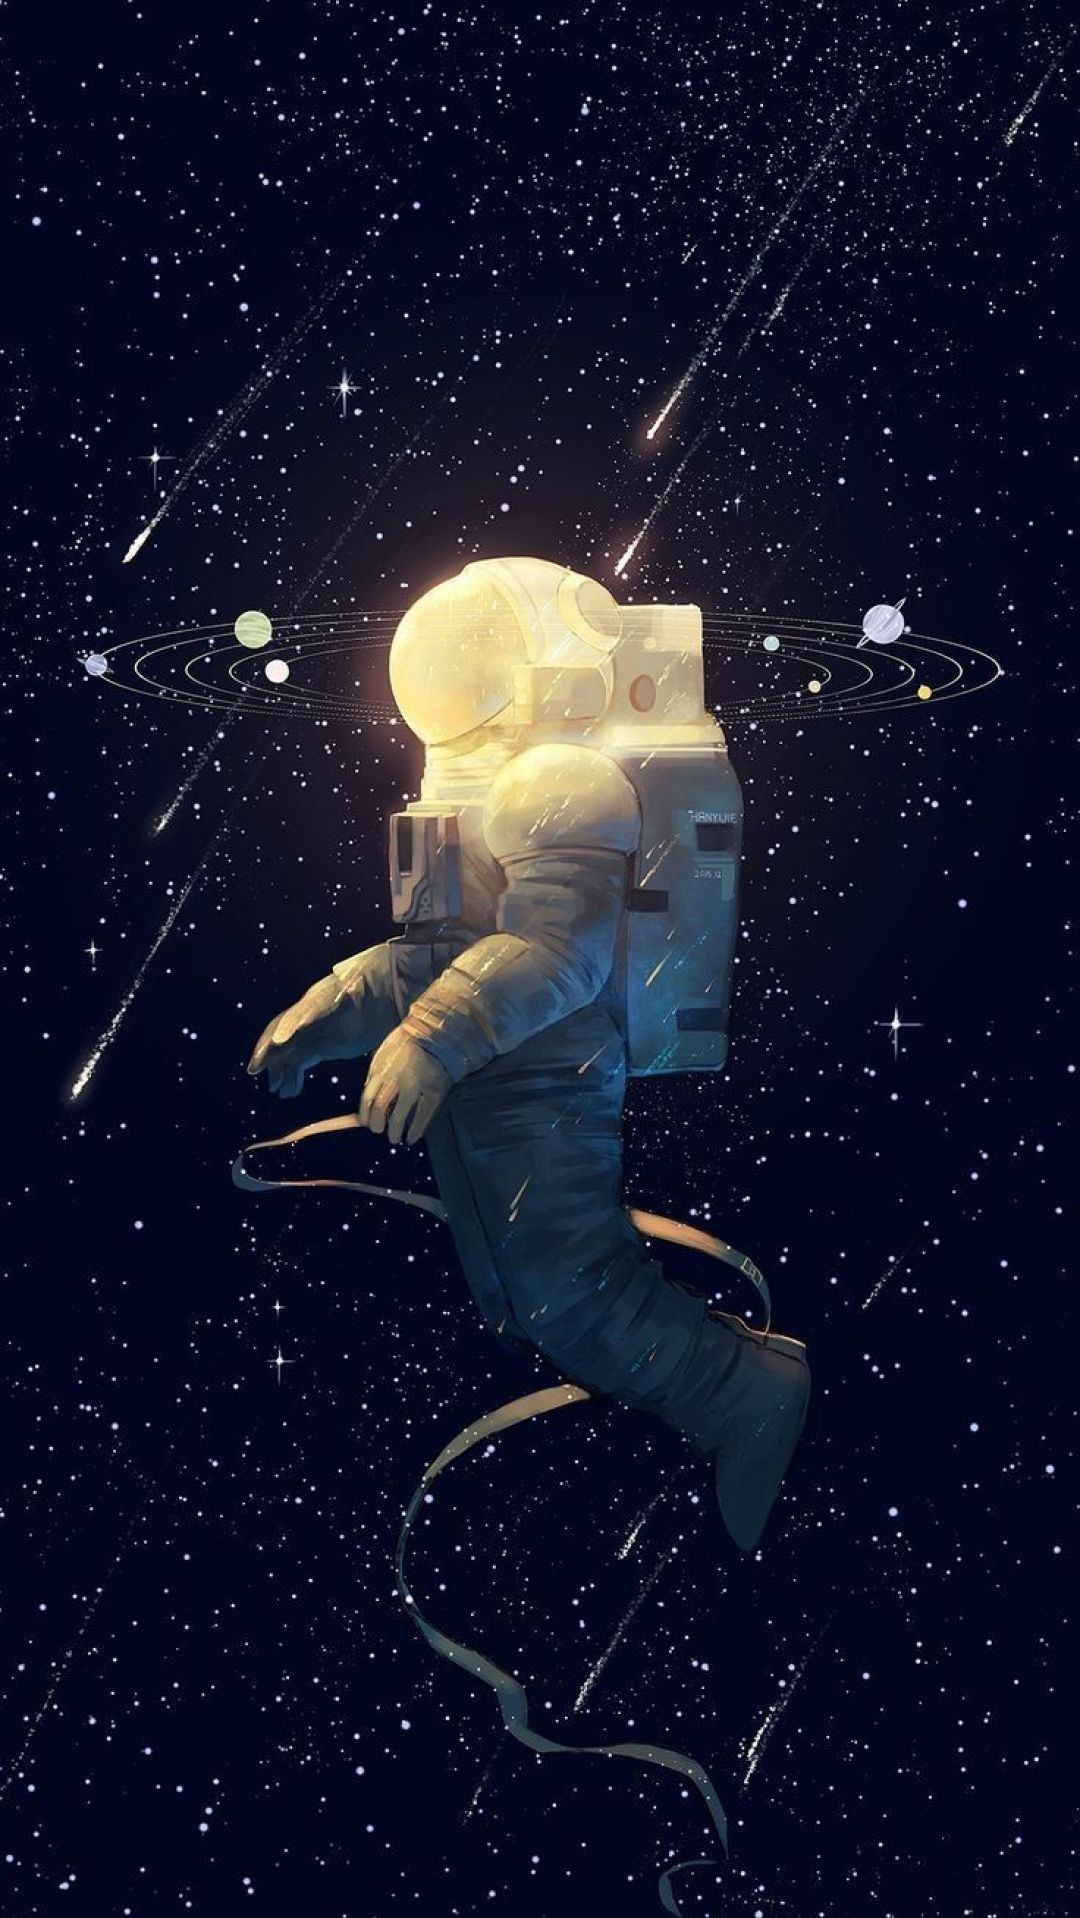 A space man floating in the stars - Astronaut